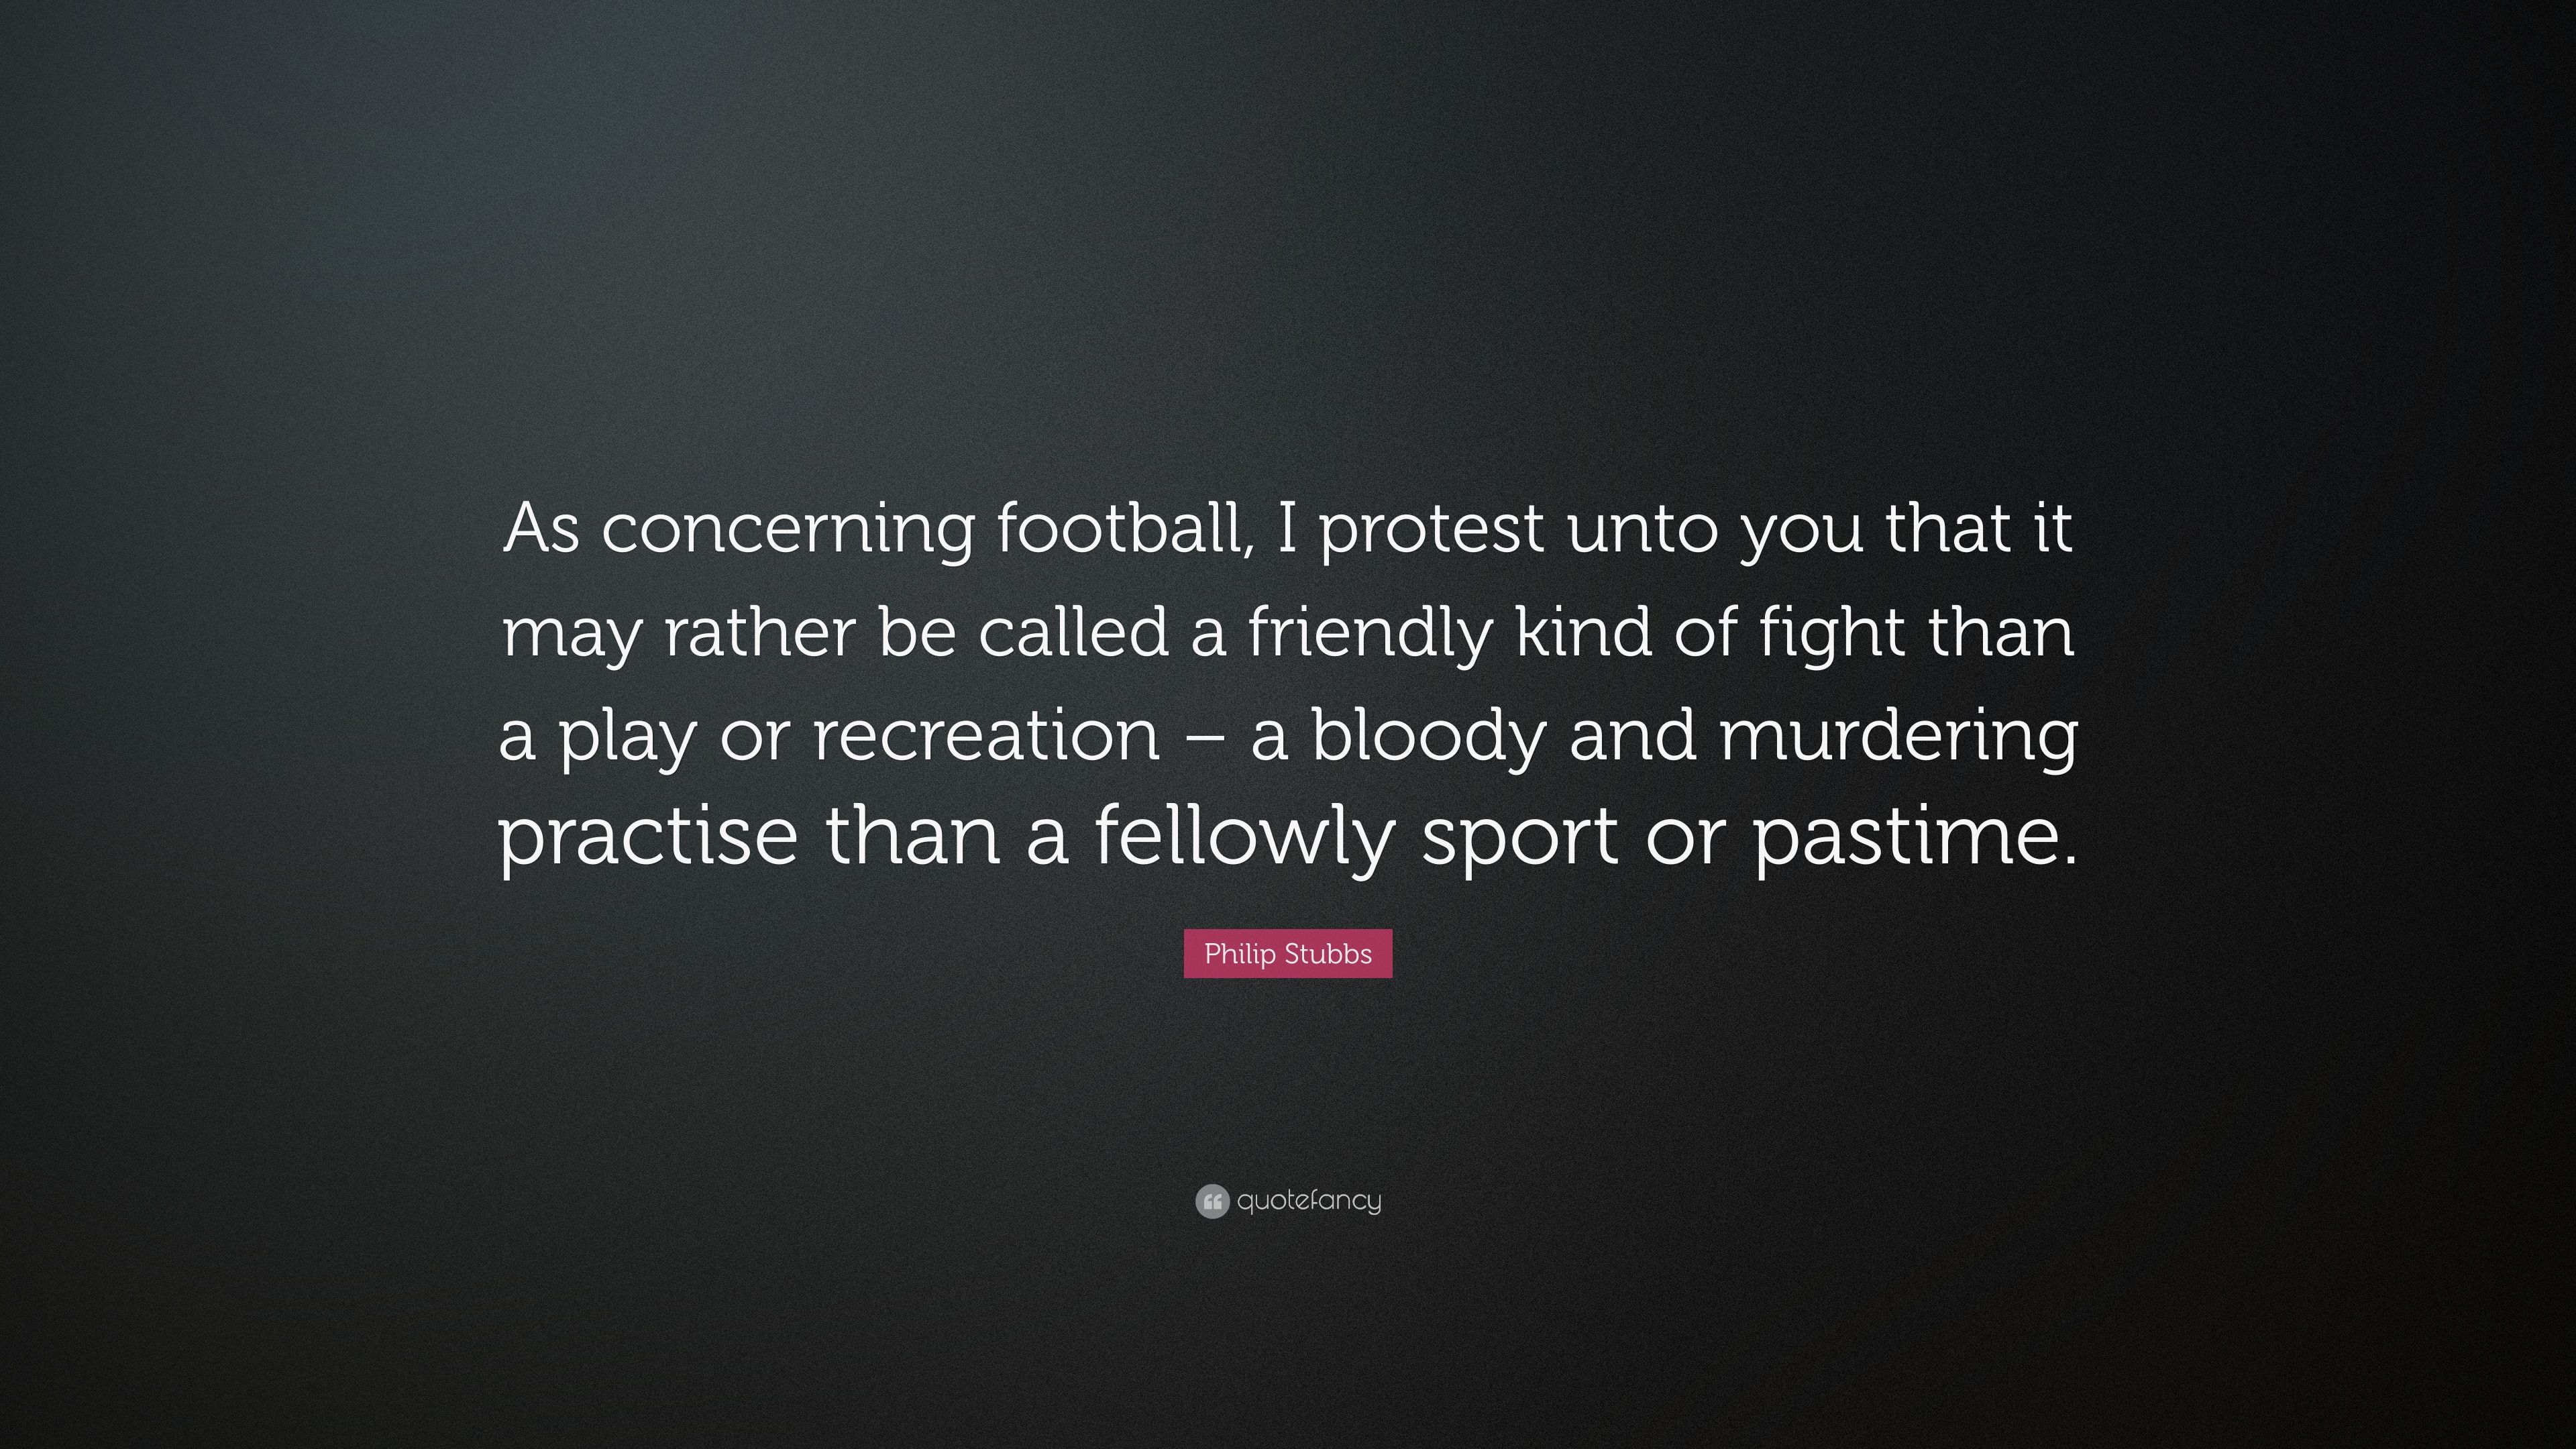 Philip Stubbs Quote: “As concerning football, I protest unto you